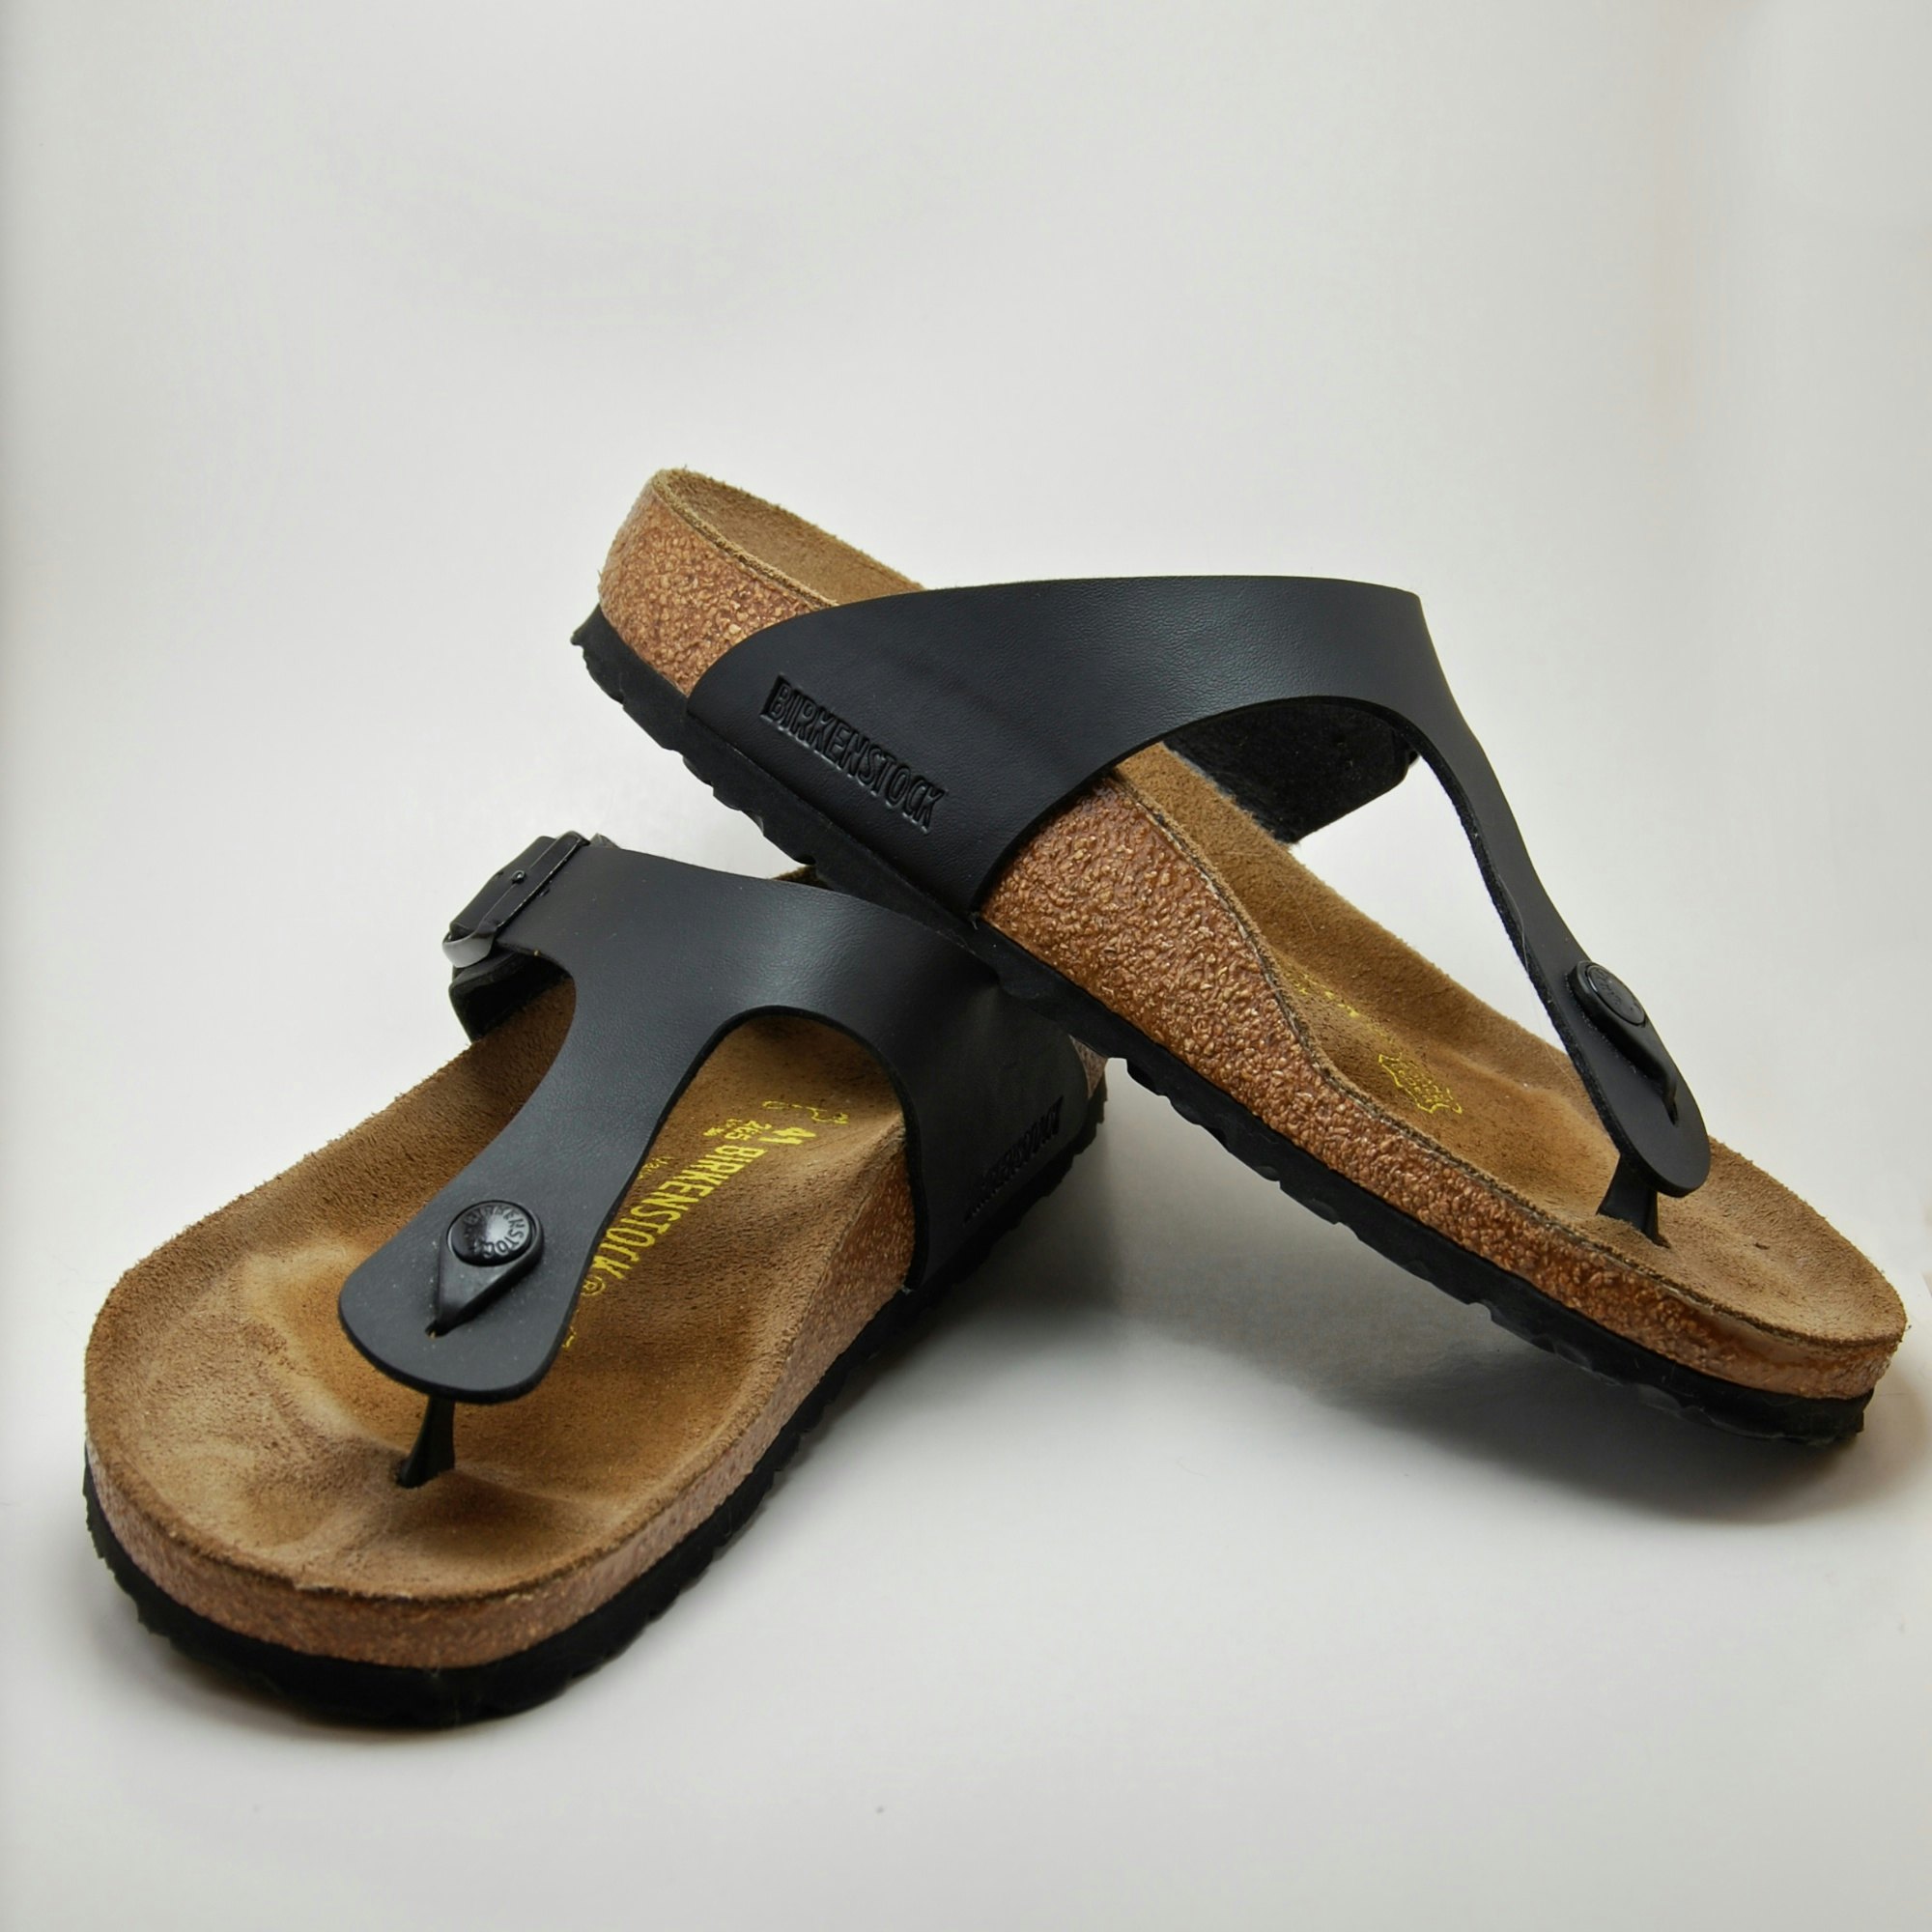 how to clean birkenstocks at home